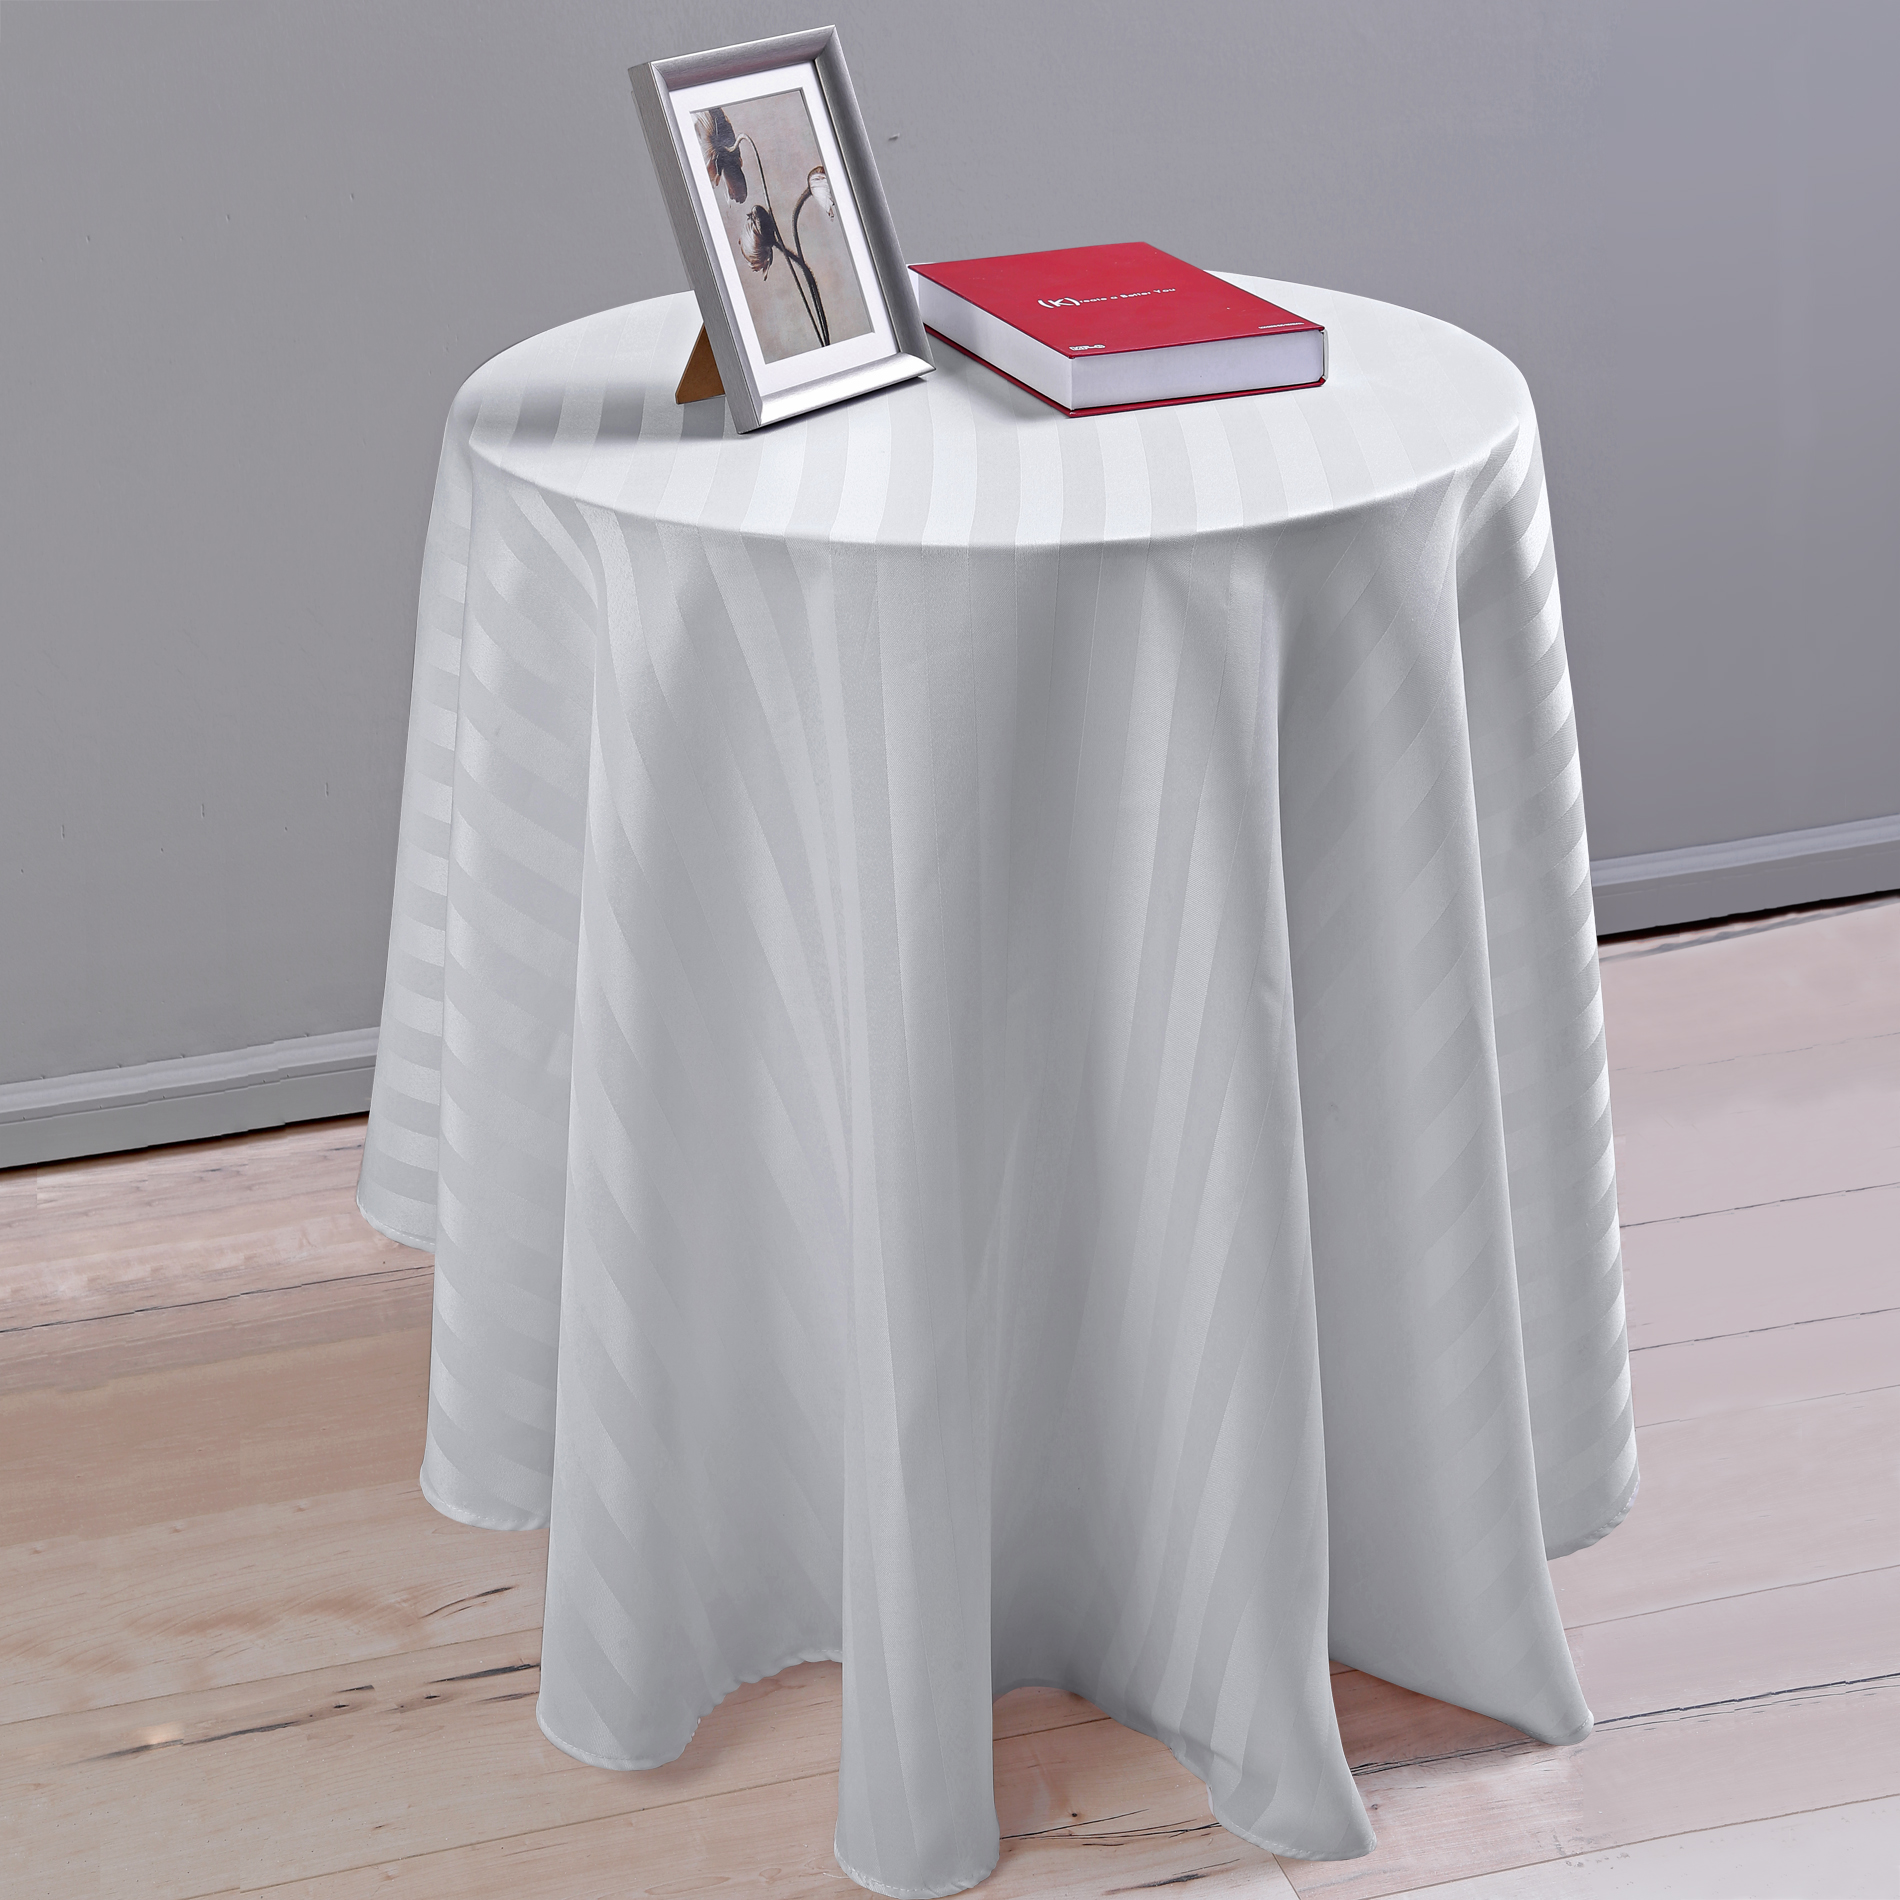 Essential Home Satin Striped Round Jacquard Tablecloth - Gray